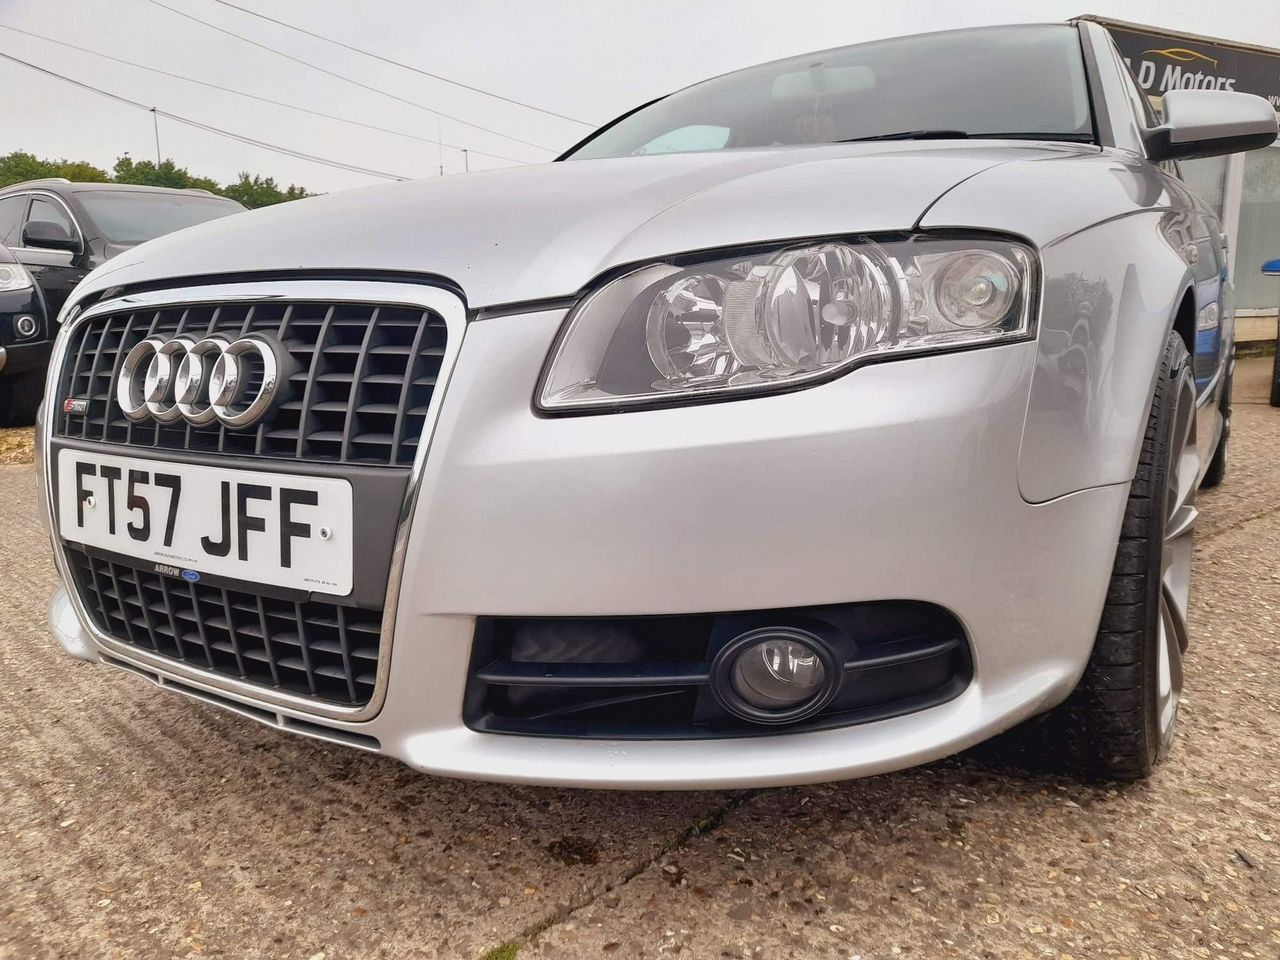 2008 Audi A4 2.0 TDI S line CVT 4dr - Picture 11 of 50